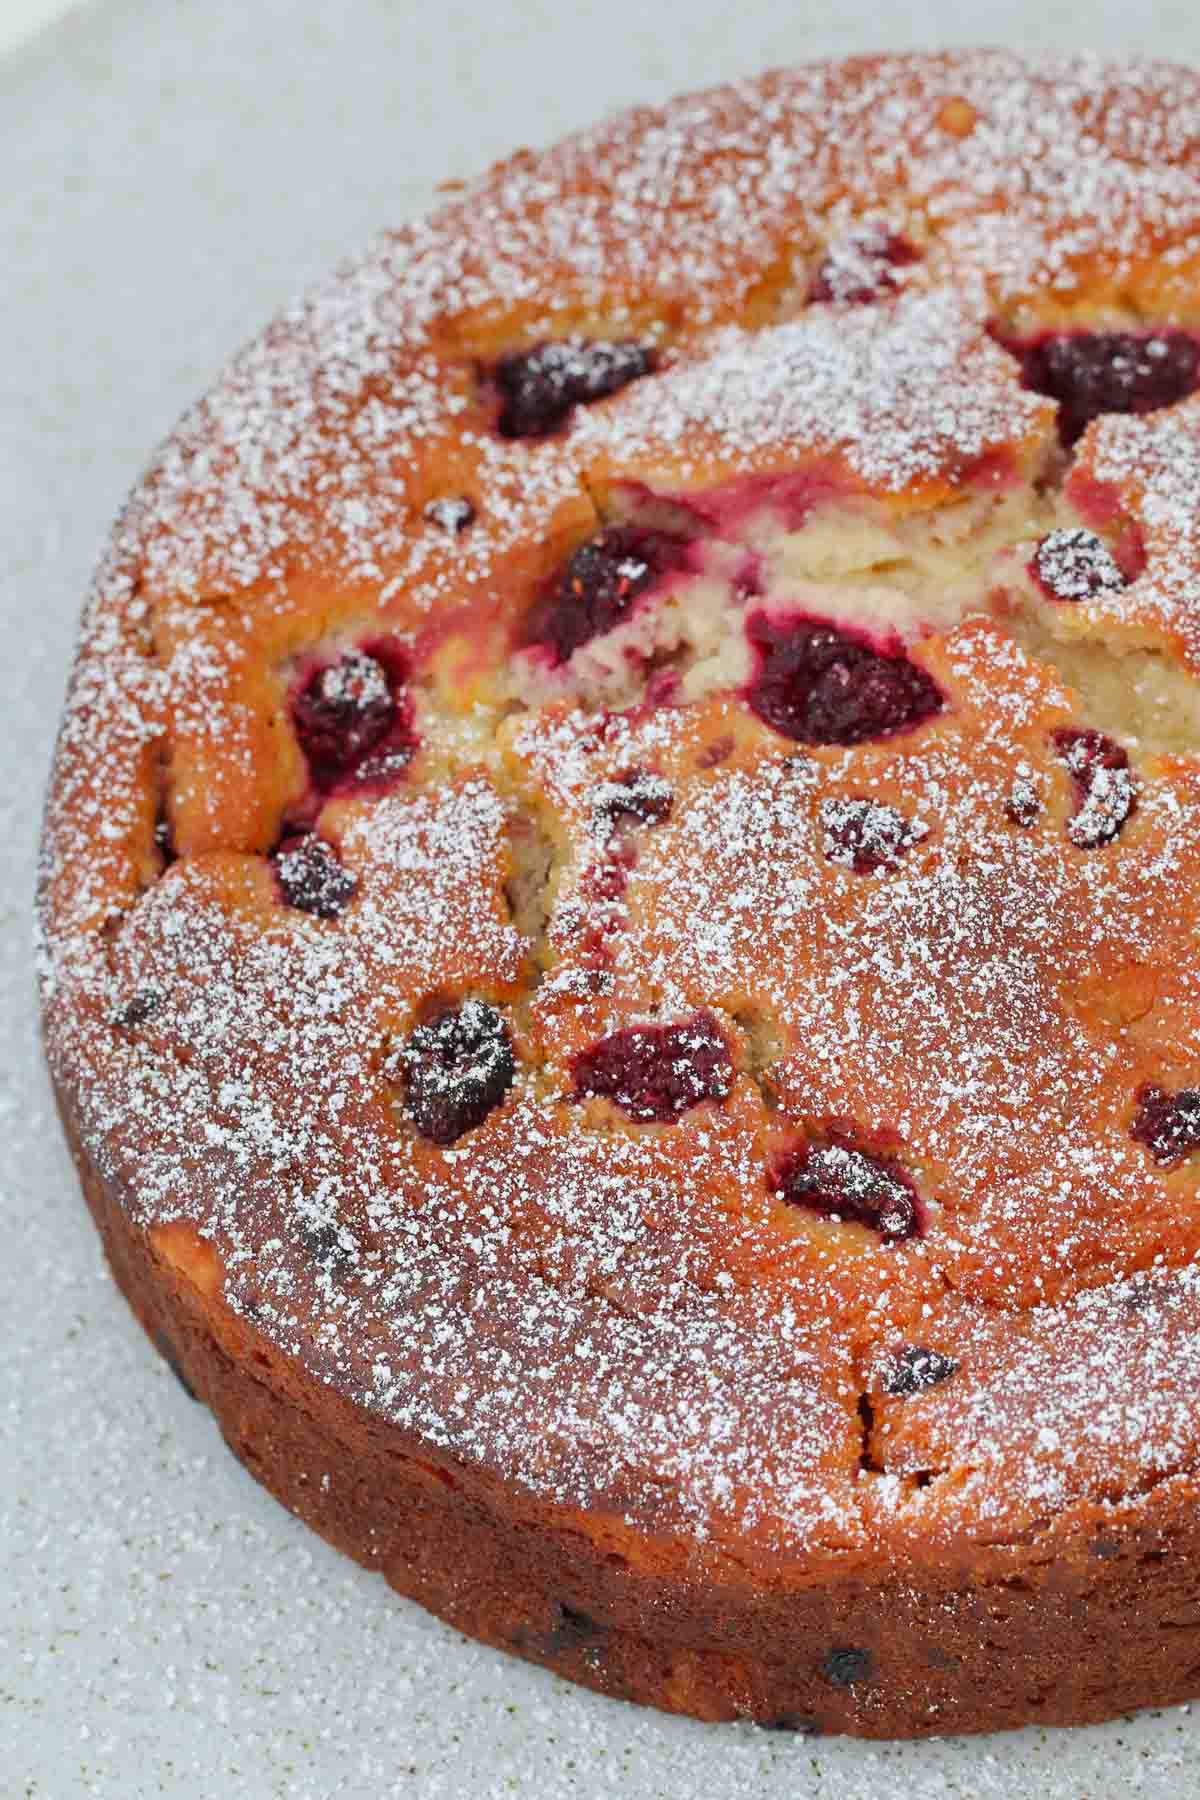 Overhead view of a raspberry ricotta cake dusted with icing sugar